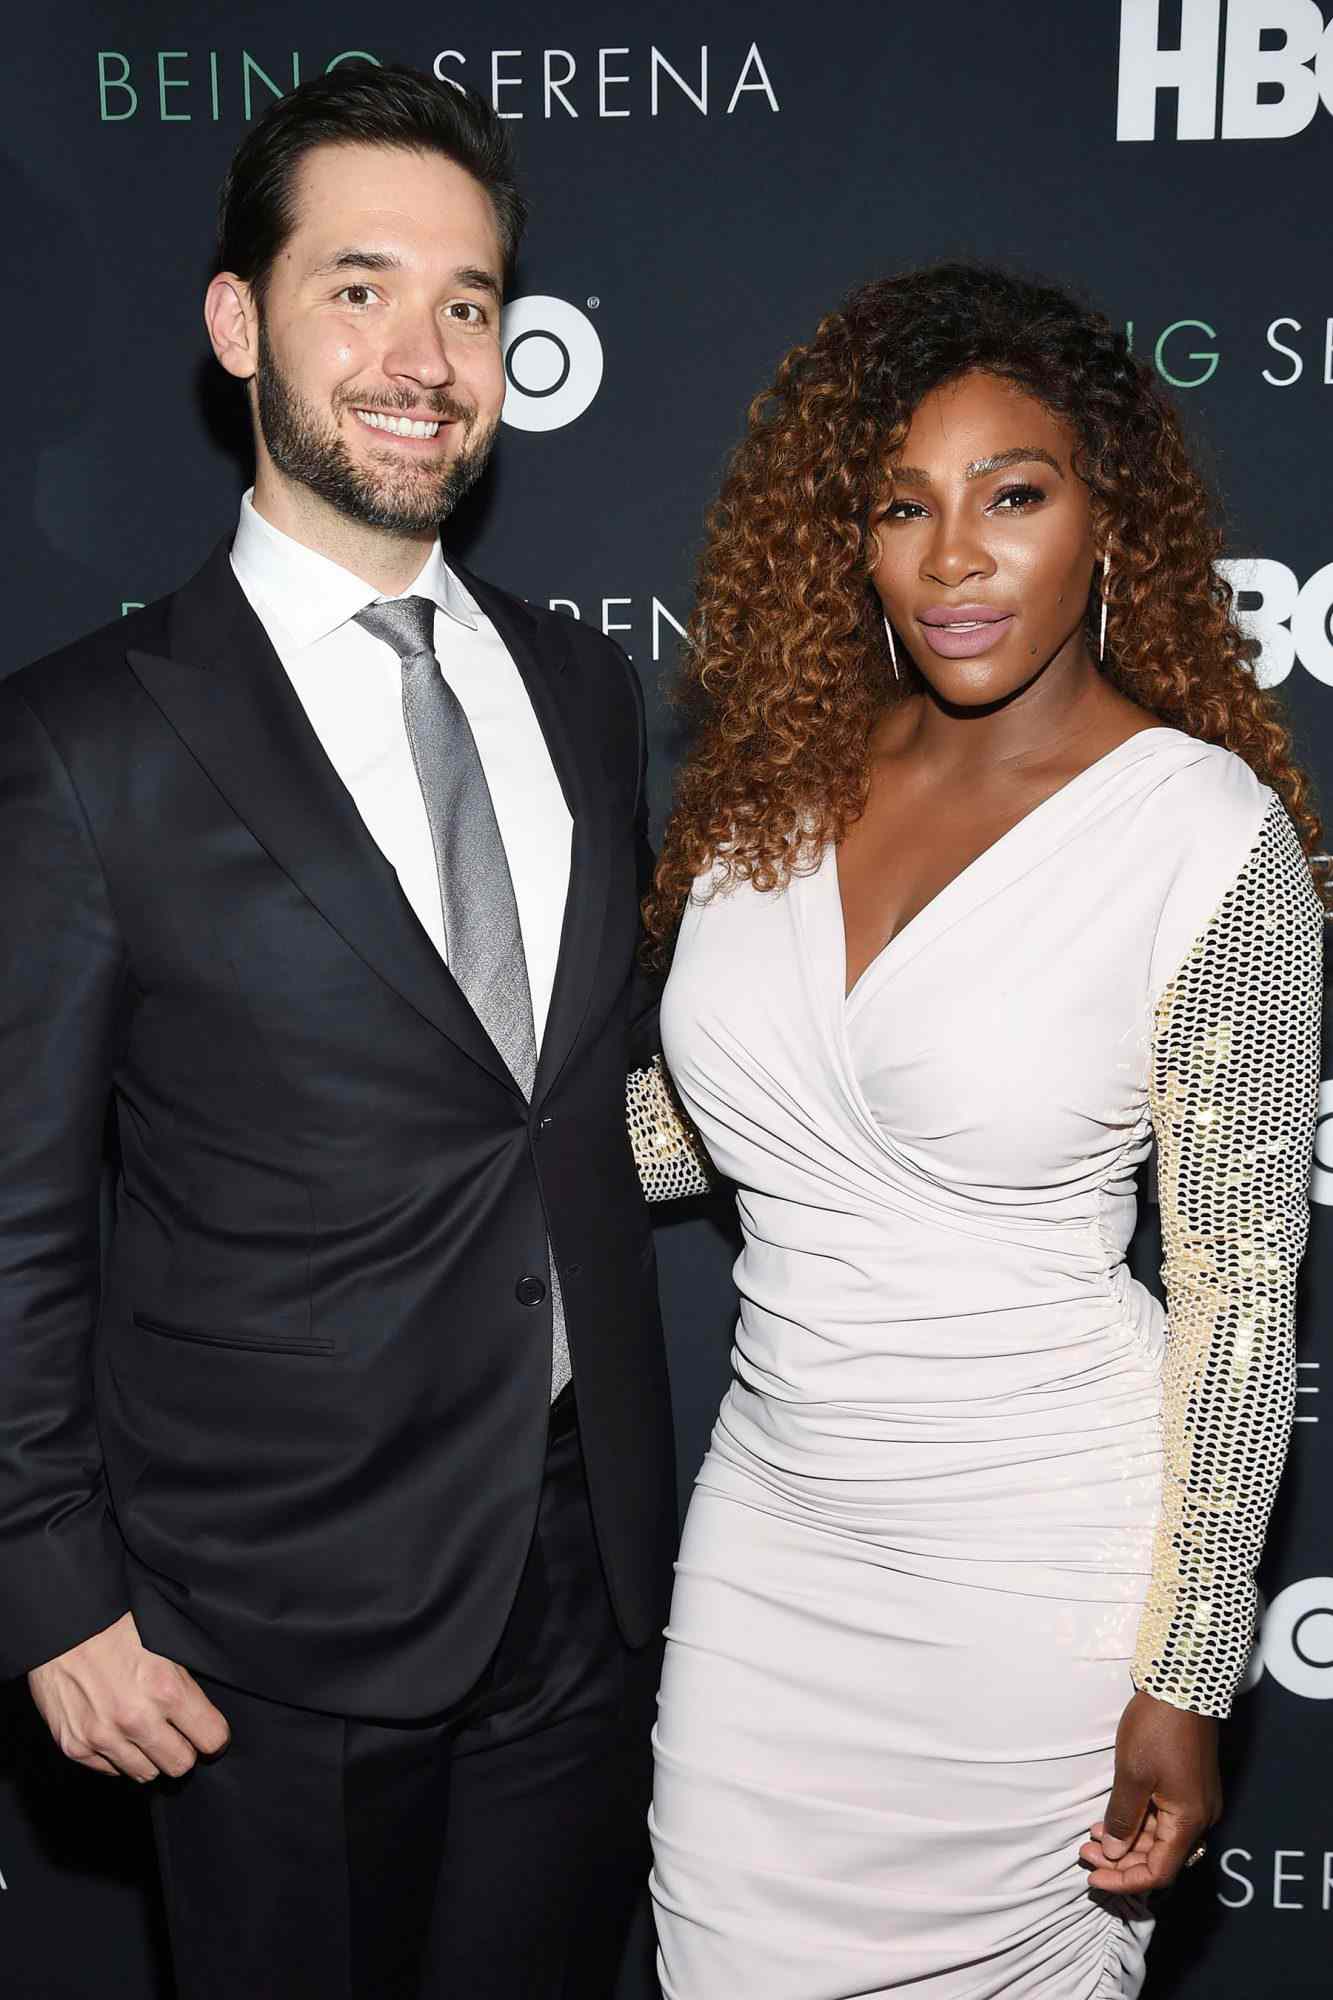 NY Premiere of HBO's "Being Serena", New York, USA - 25 Apr 2018